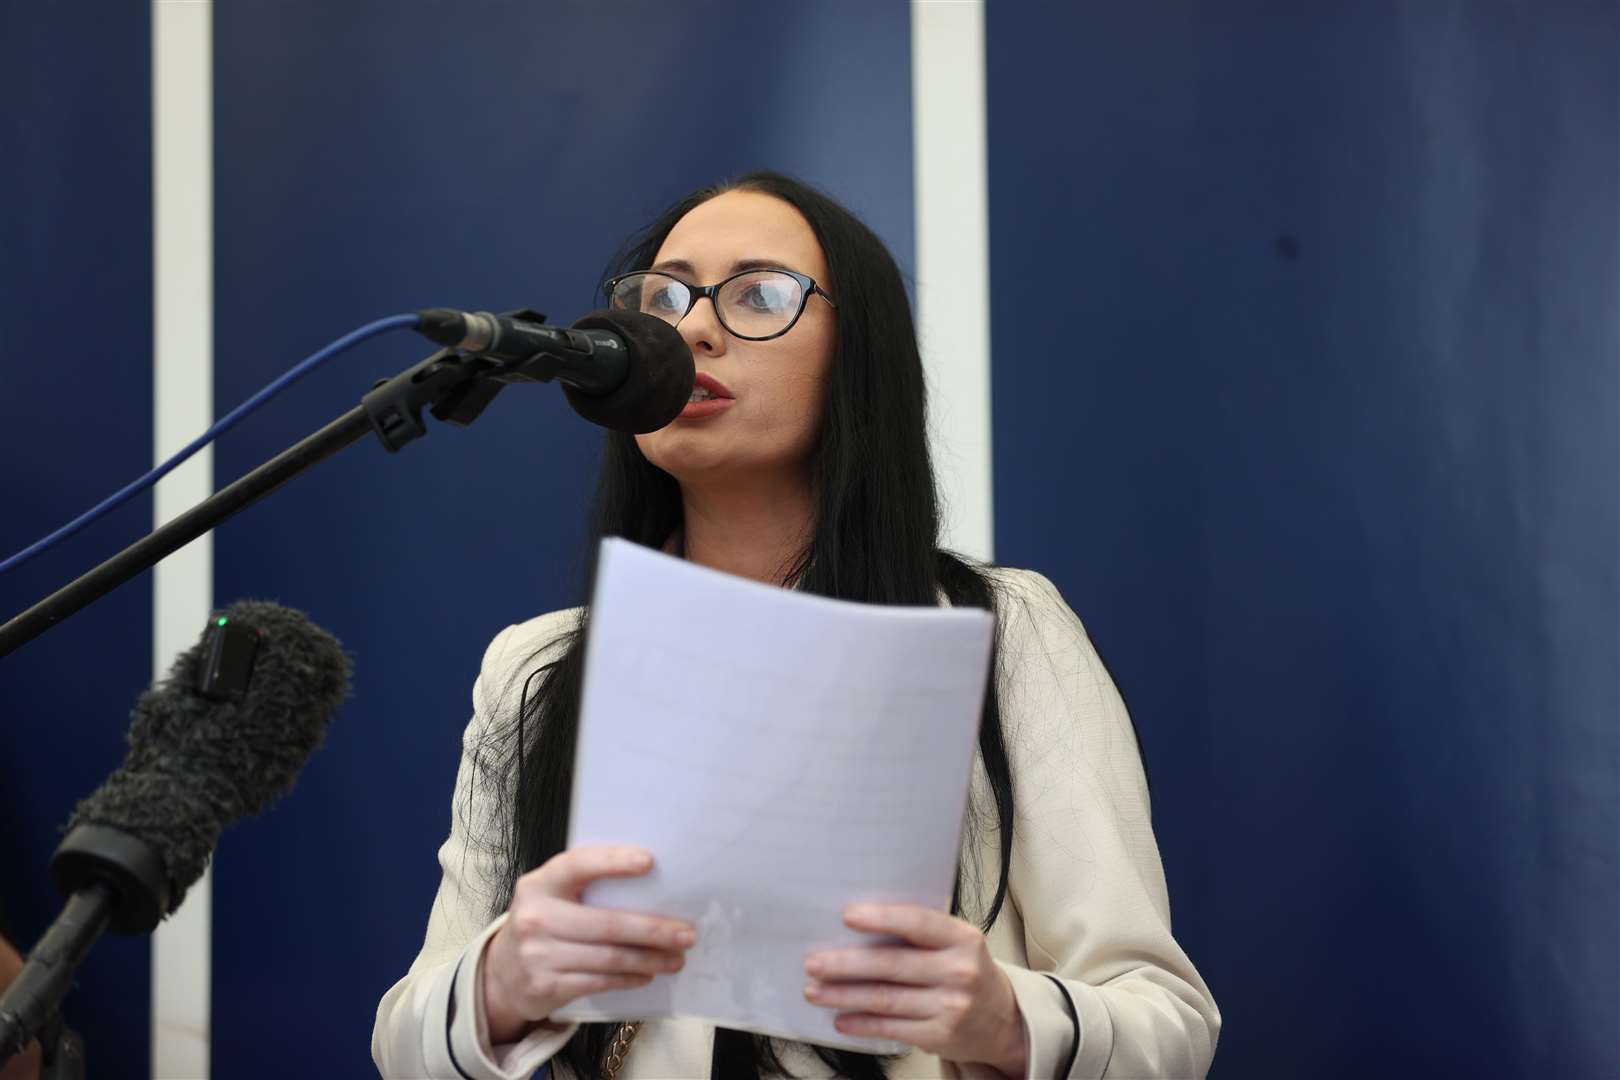 Natasha Butler speaks during the Time for Truth rally at Belfast City Hall (Liam McBurney/PA)